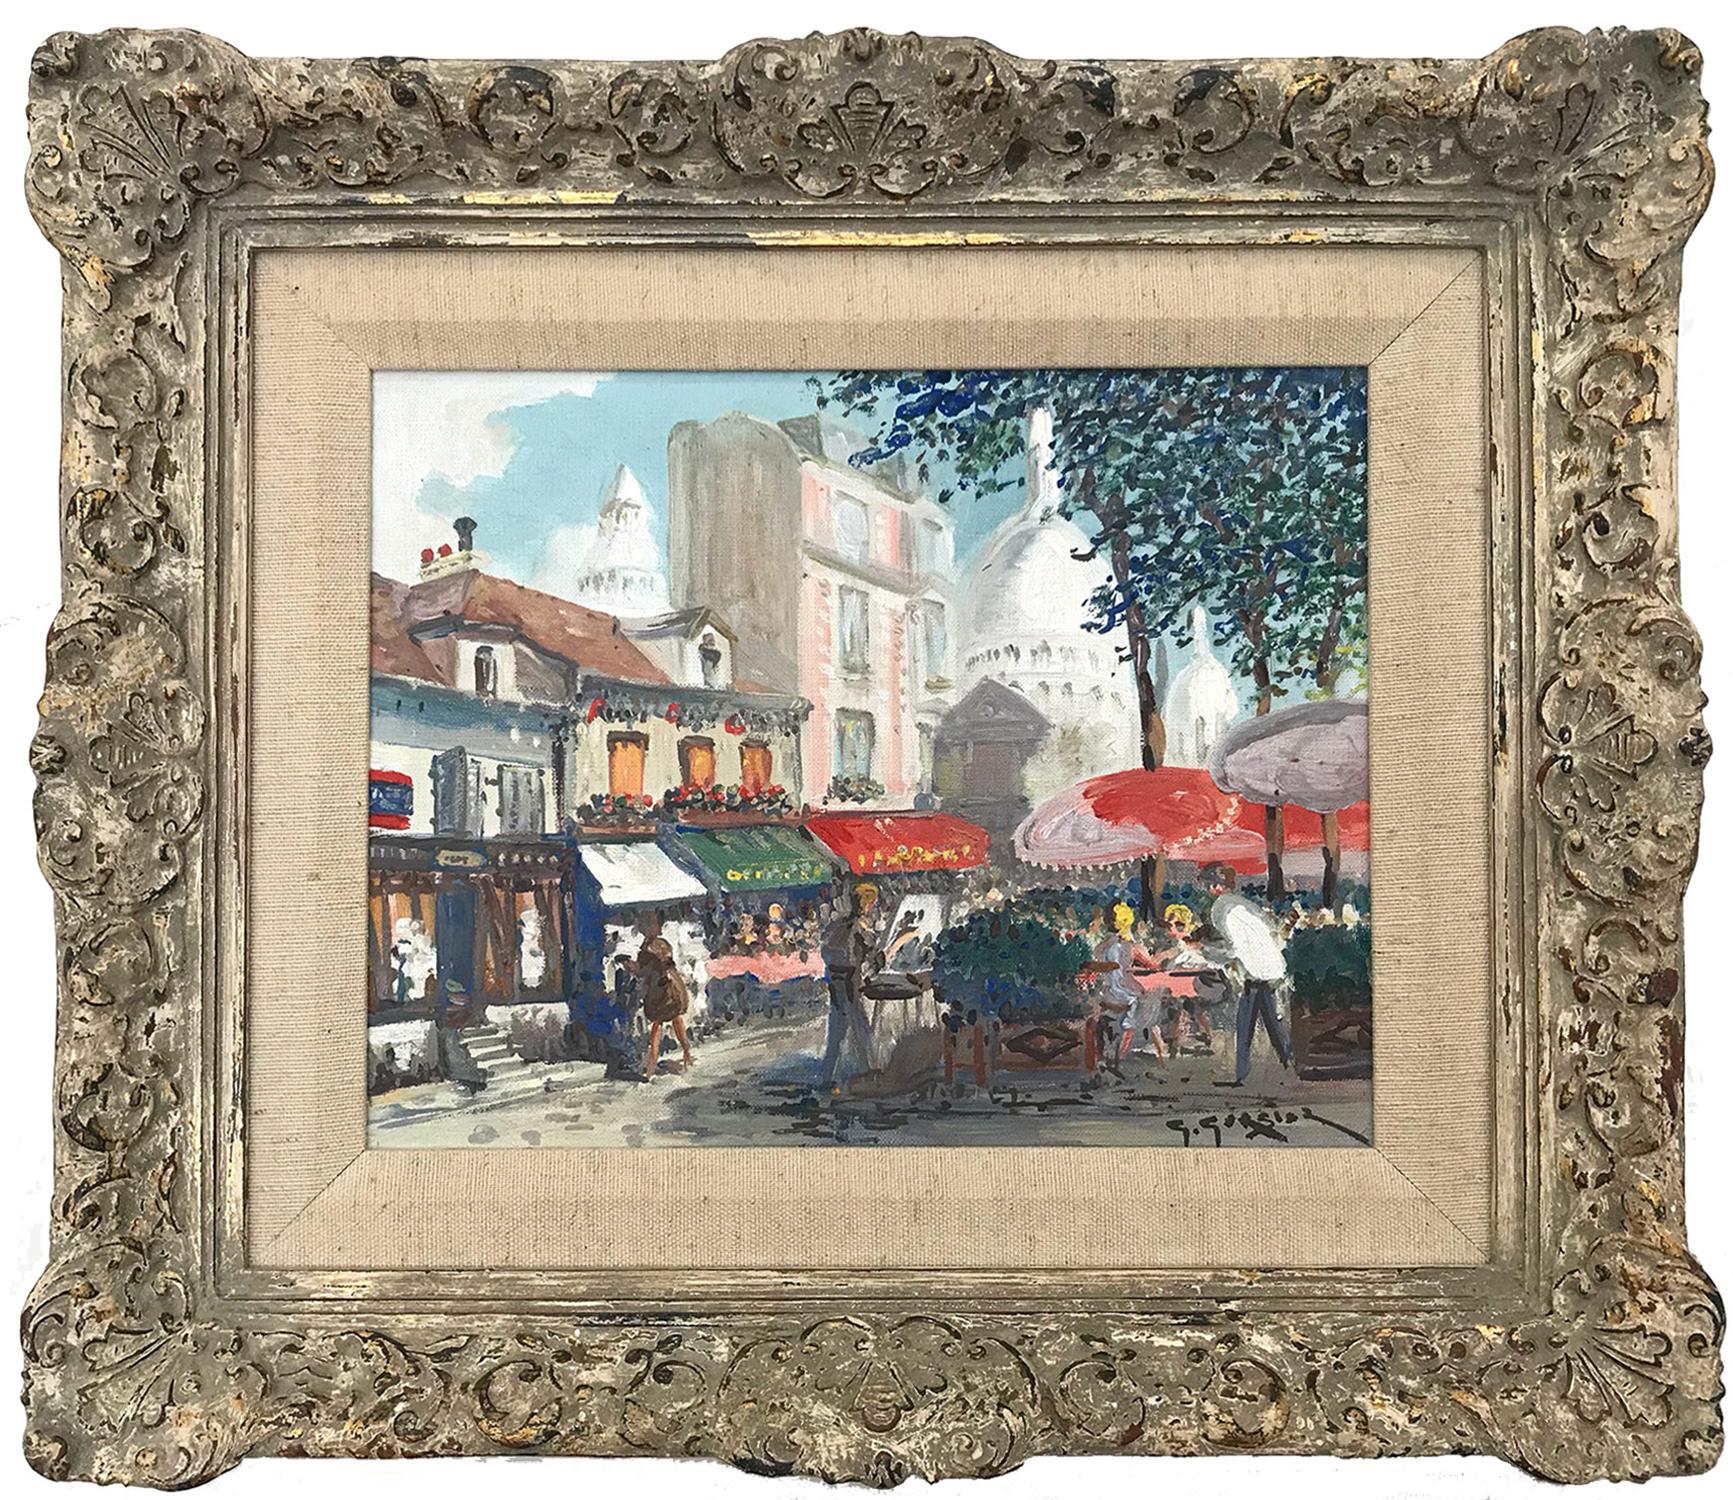 Georges Gerbier Figurative Painting - "Place Du Tertre " Impressionist Oil Painting with Figures in Parisian Village